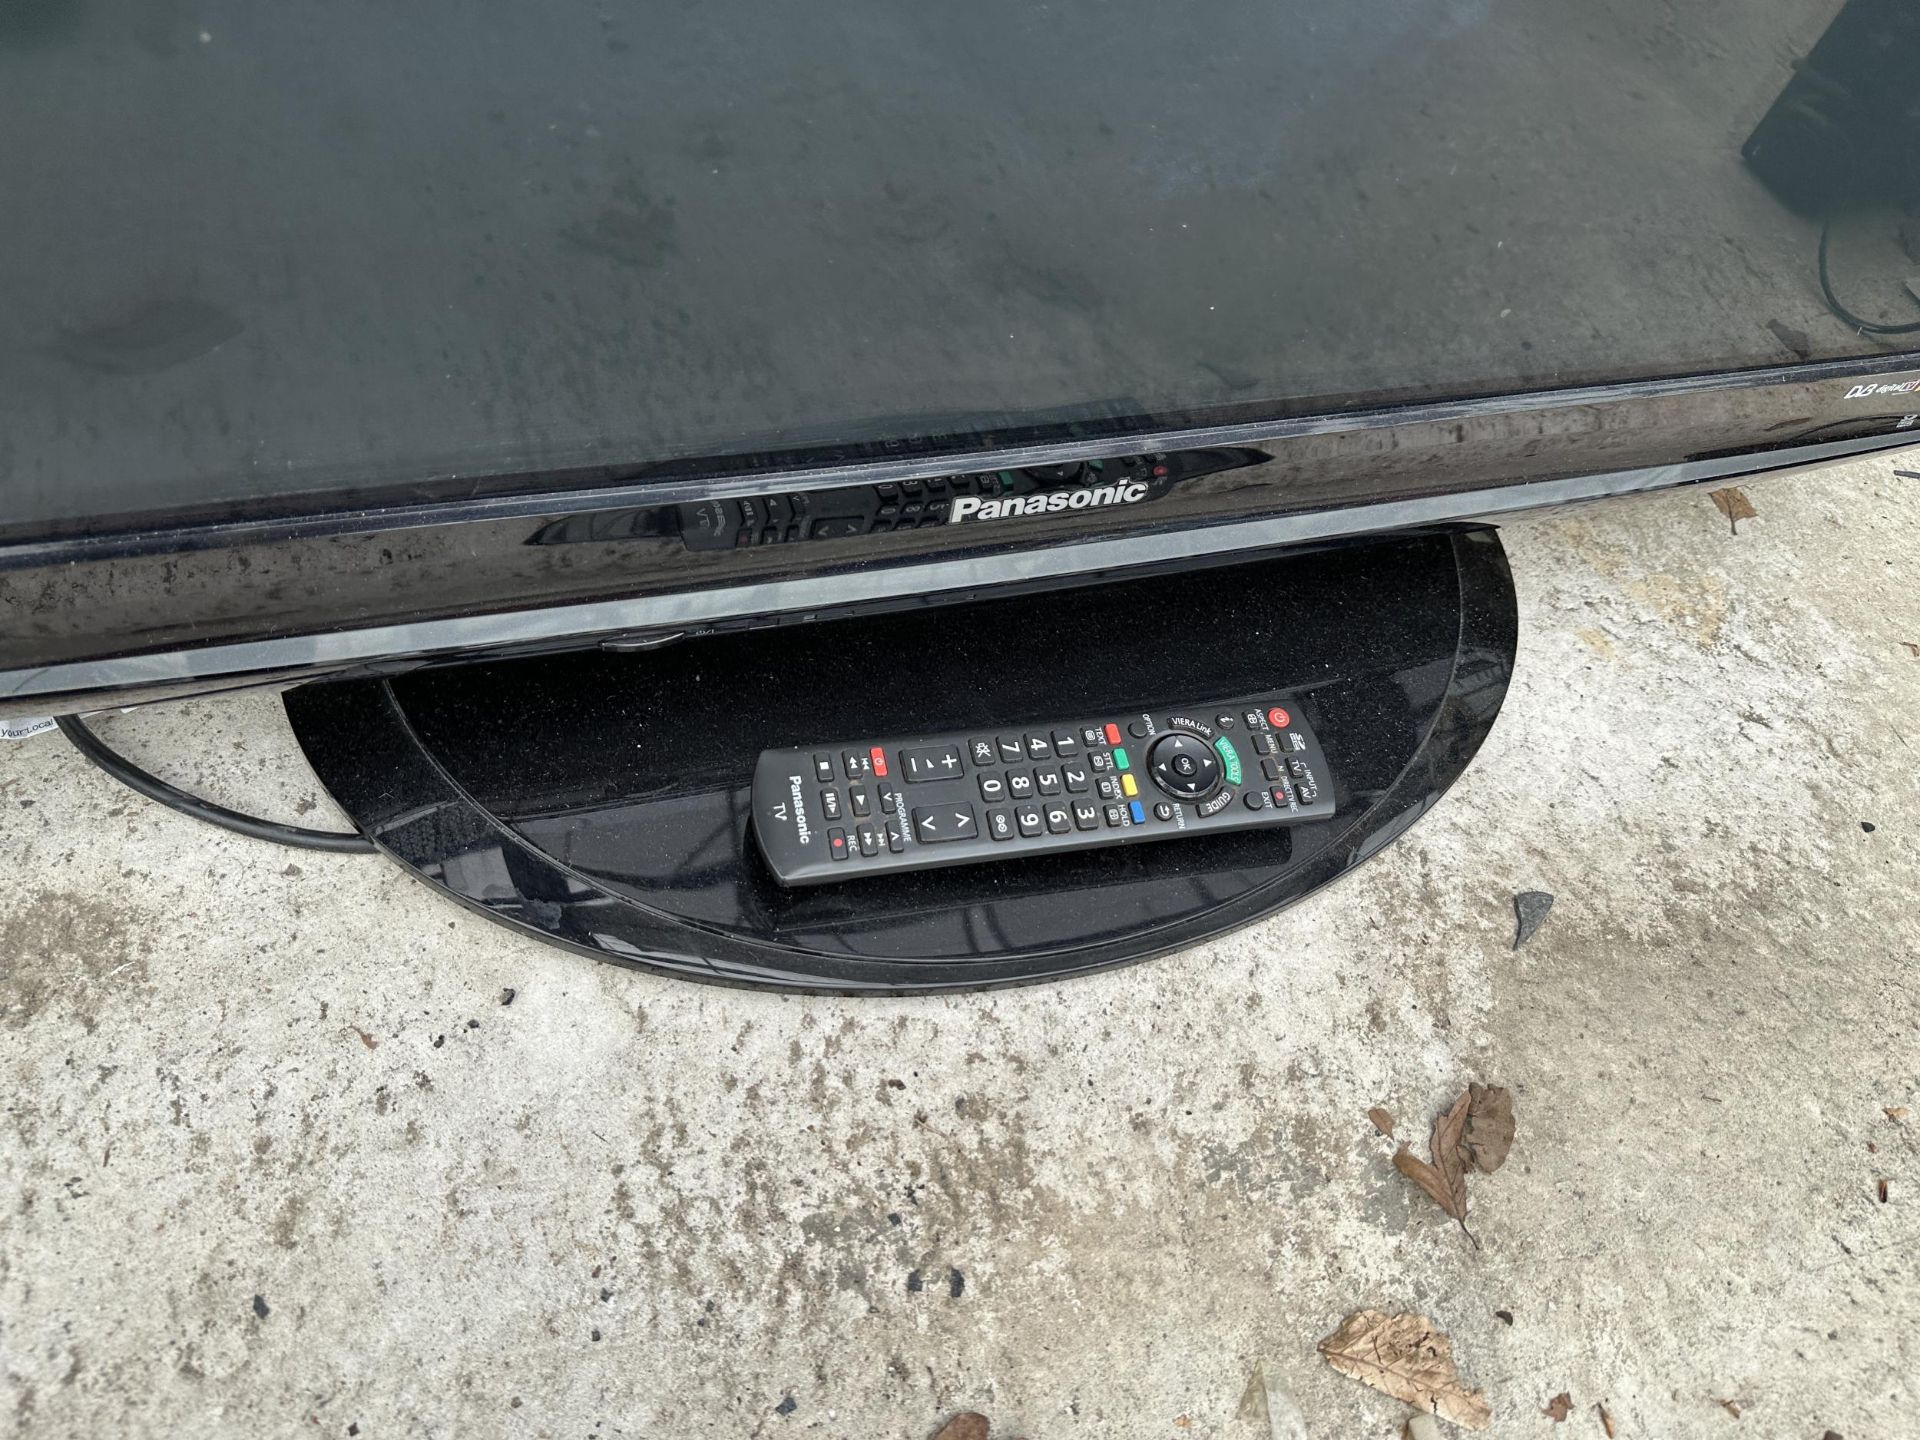 A PANASONIC 37" TELEVISION WITH REMOTE CONTROL - Image 2 of 3